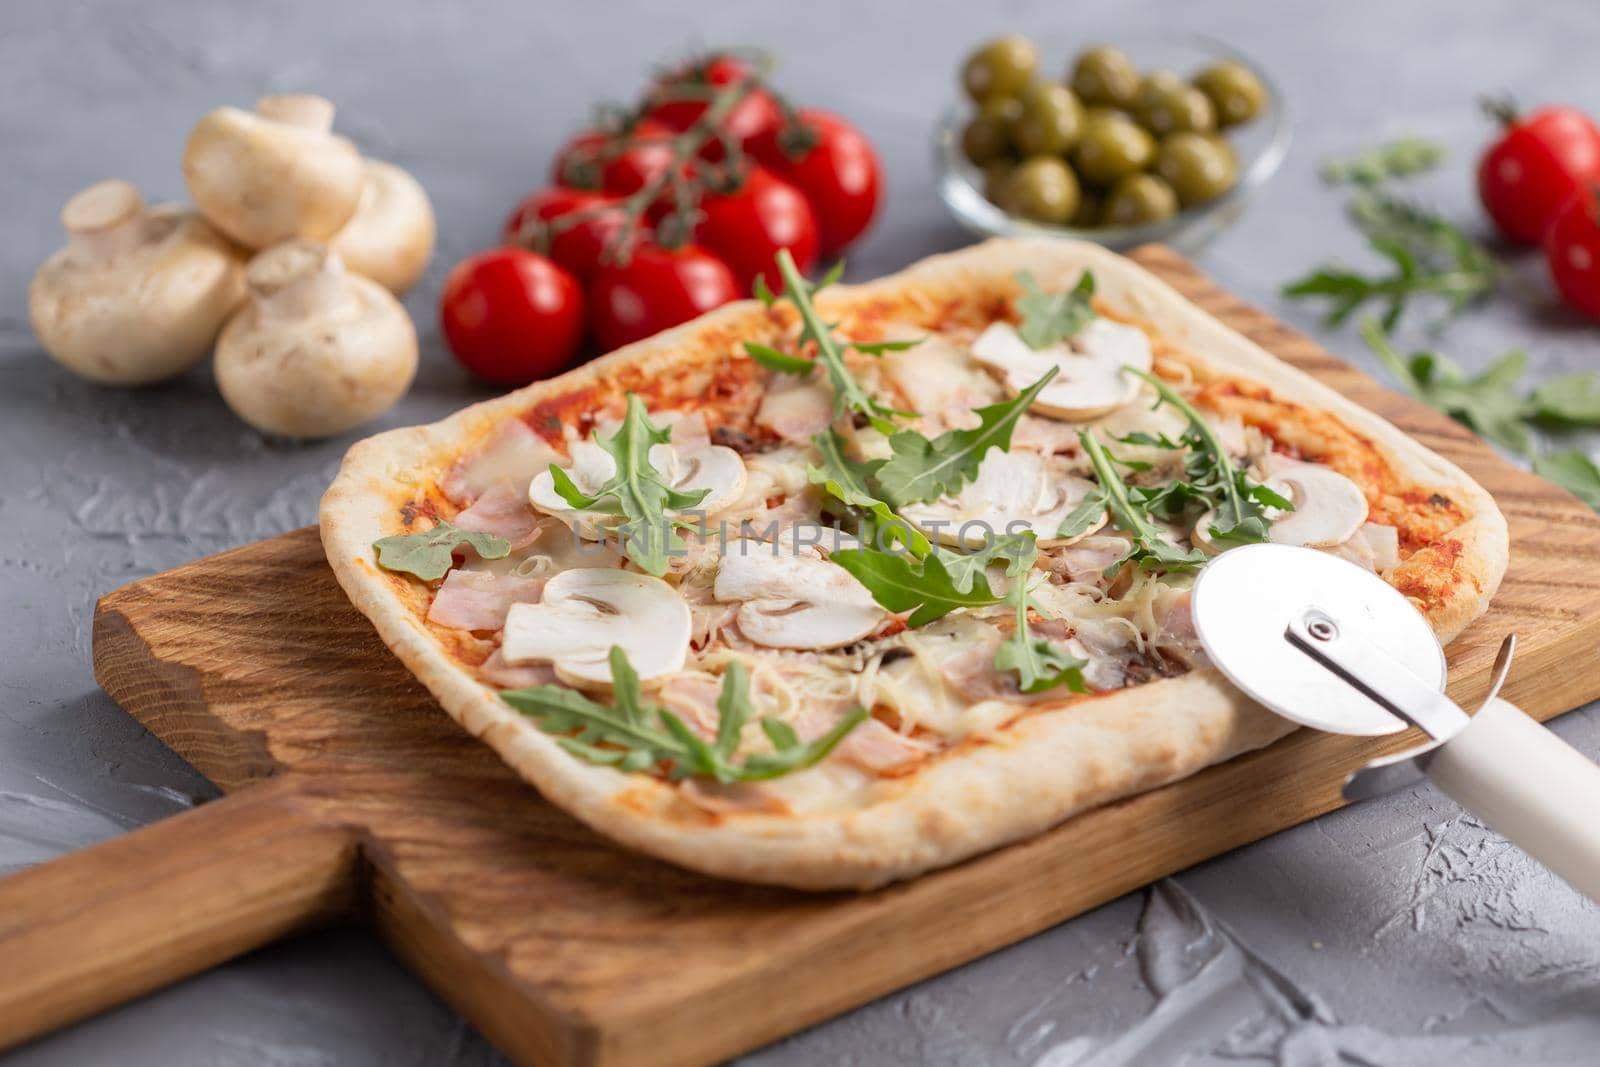 Rectangular pizza with mushrooms, tomatoes and arugula on a wooden cutting board by Satura86